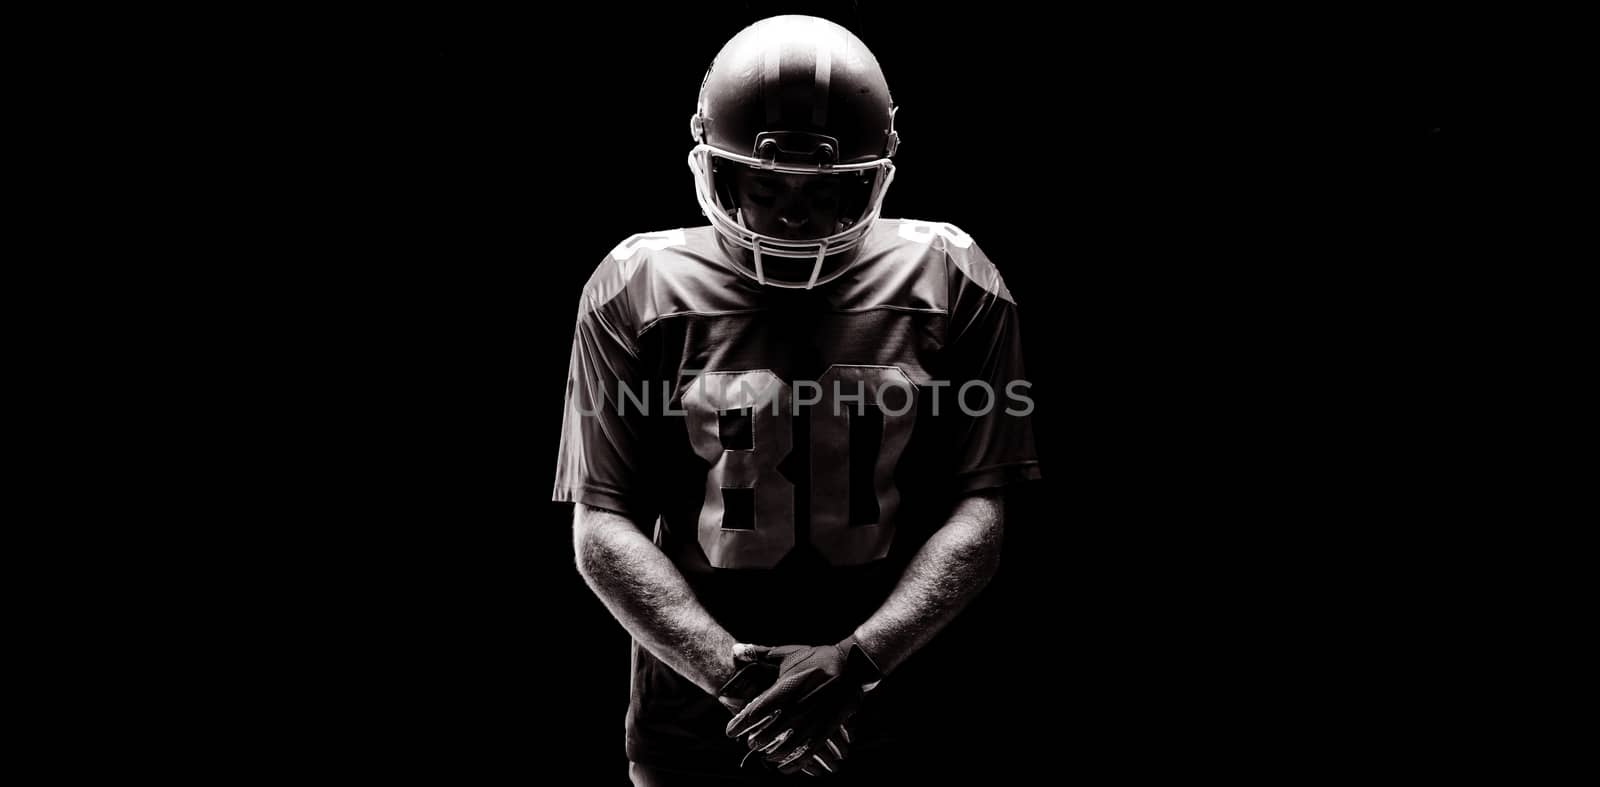 American football player standing with rugby helmat against black background